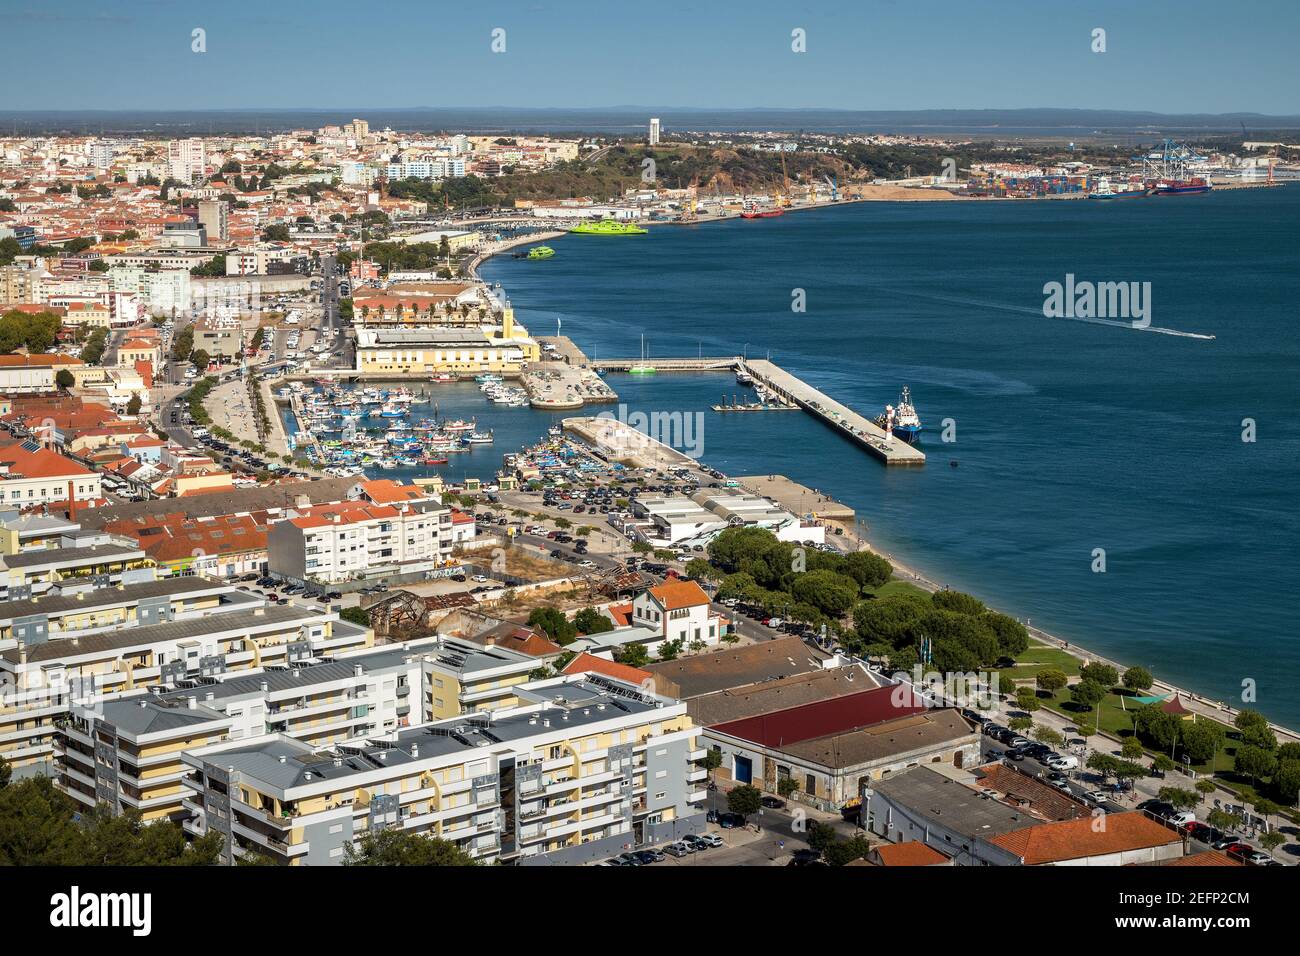 Landscape of the riverside area of the city of Setúbal in Portugal, with the fishing port as the central focus. Stock Photo